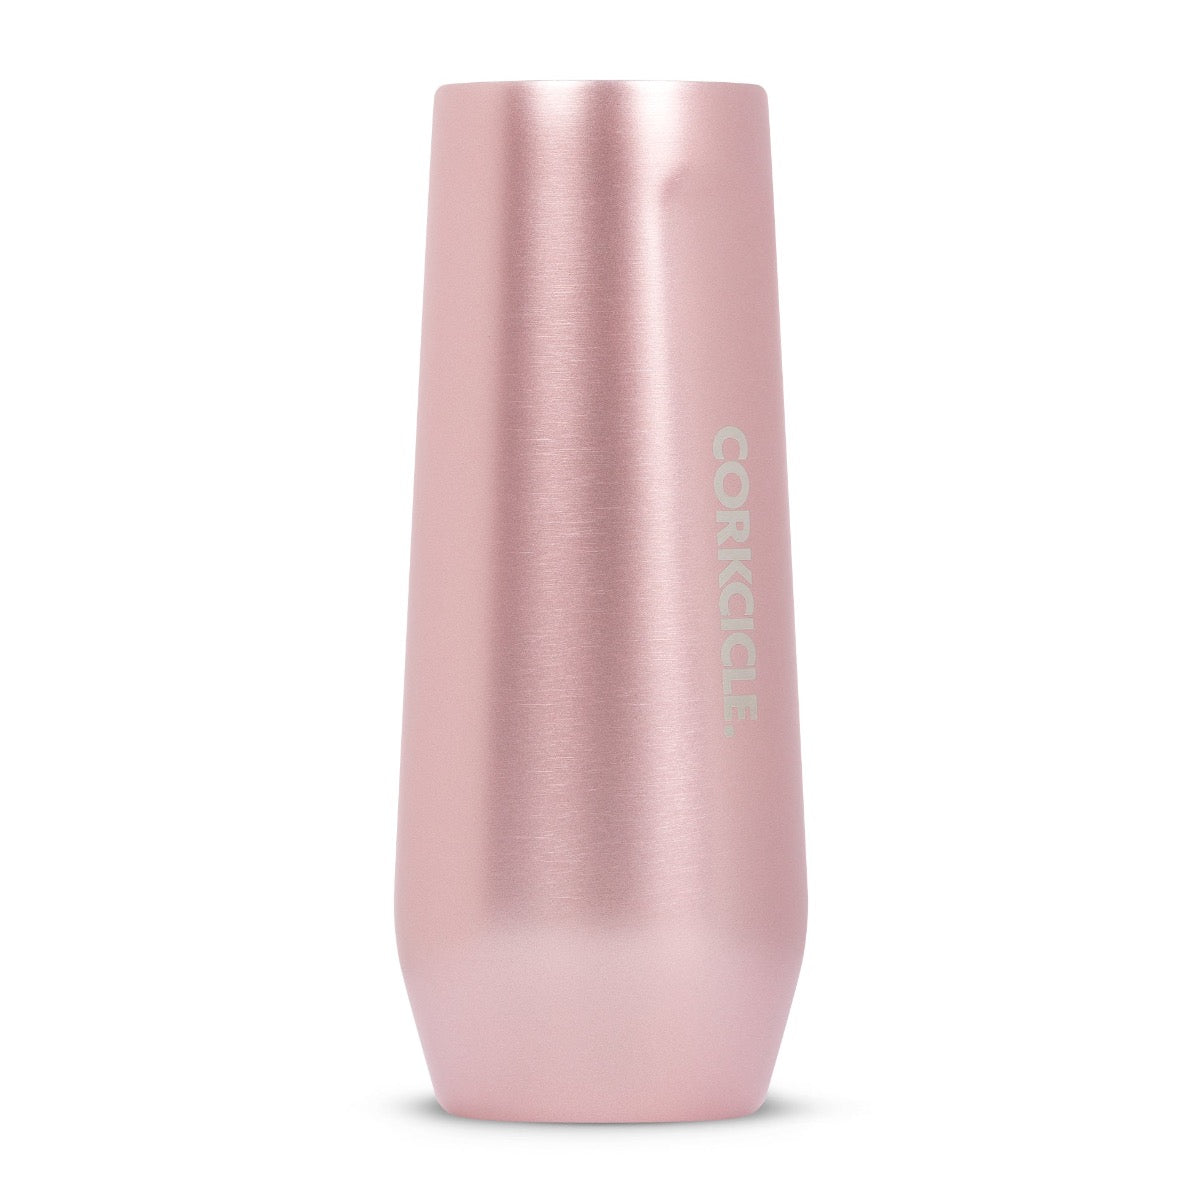 Corkcicle Stemless Flute 200ml - Rose Metallic - Insulated Stainless Steel Flute